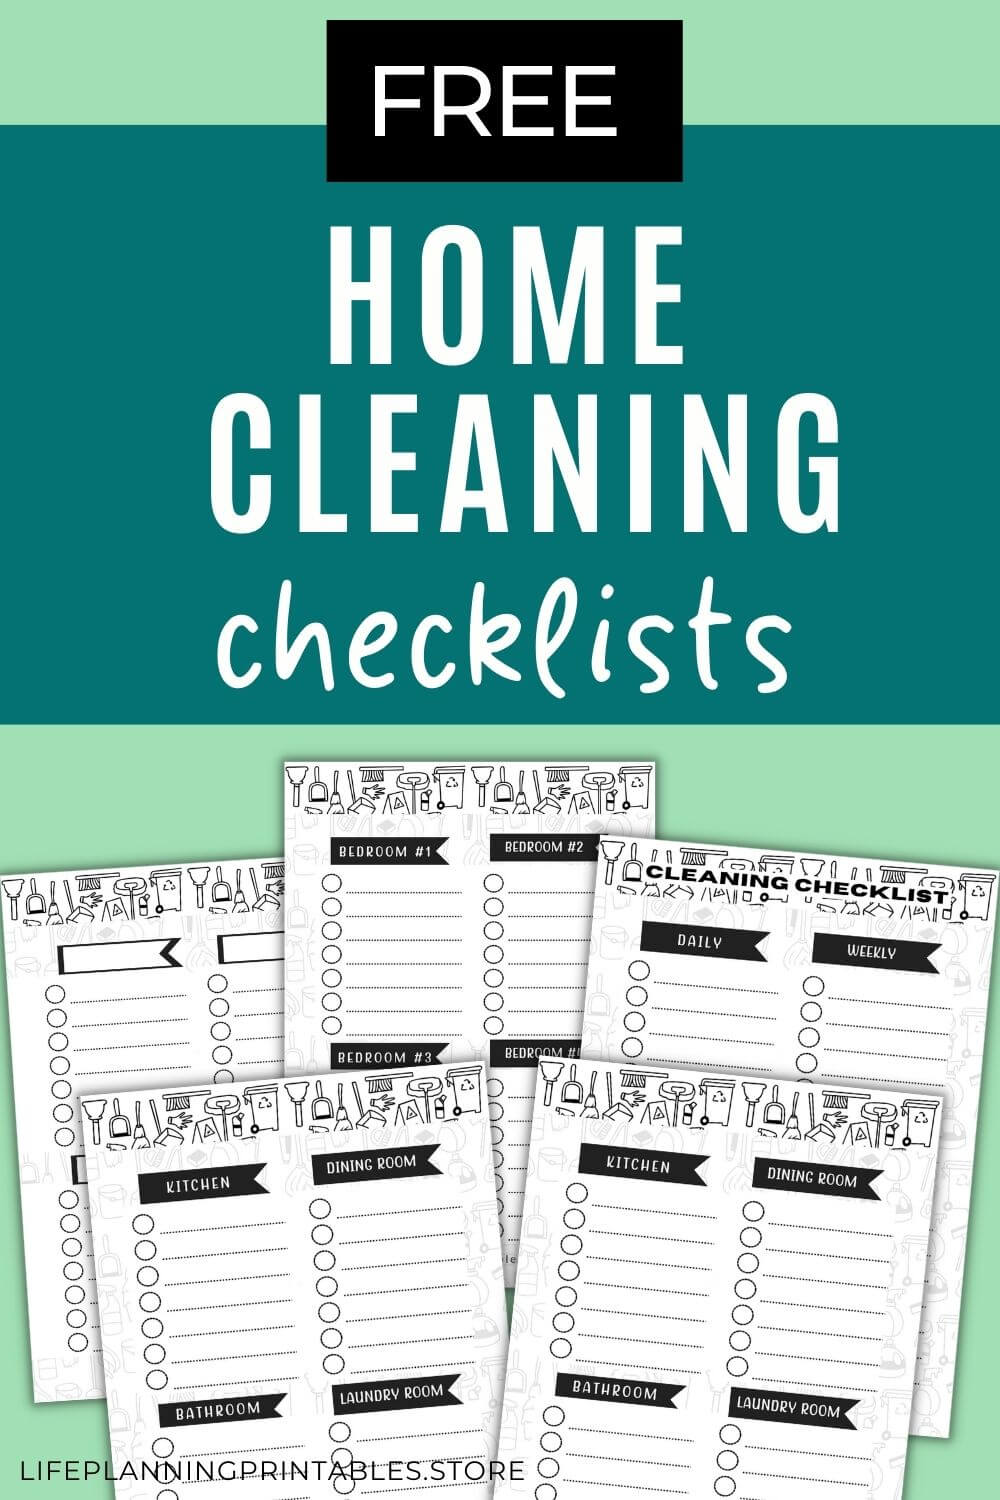 Free Home Cleaning Checklist Printables. Clean your home easily using these free home spring cleaning planner that you can download immediately. You'll get cleaning checklist for bathroom, living room kitchen. bathroom and more